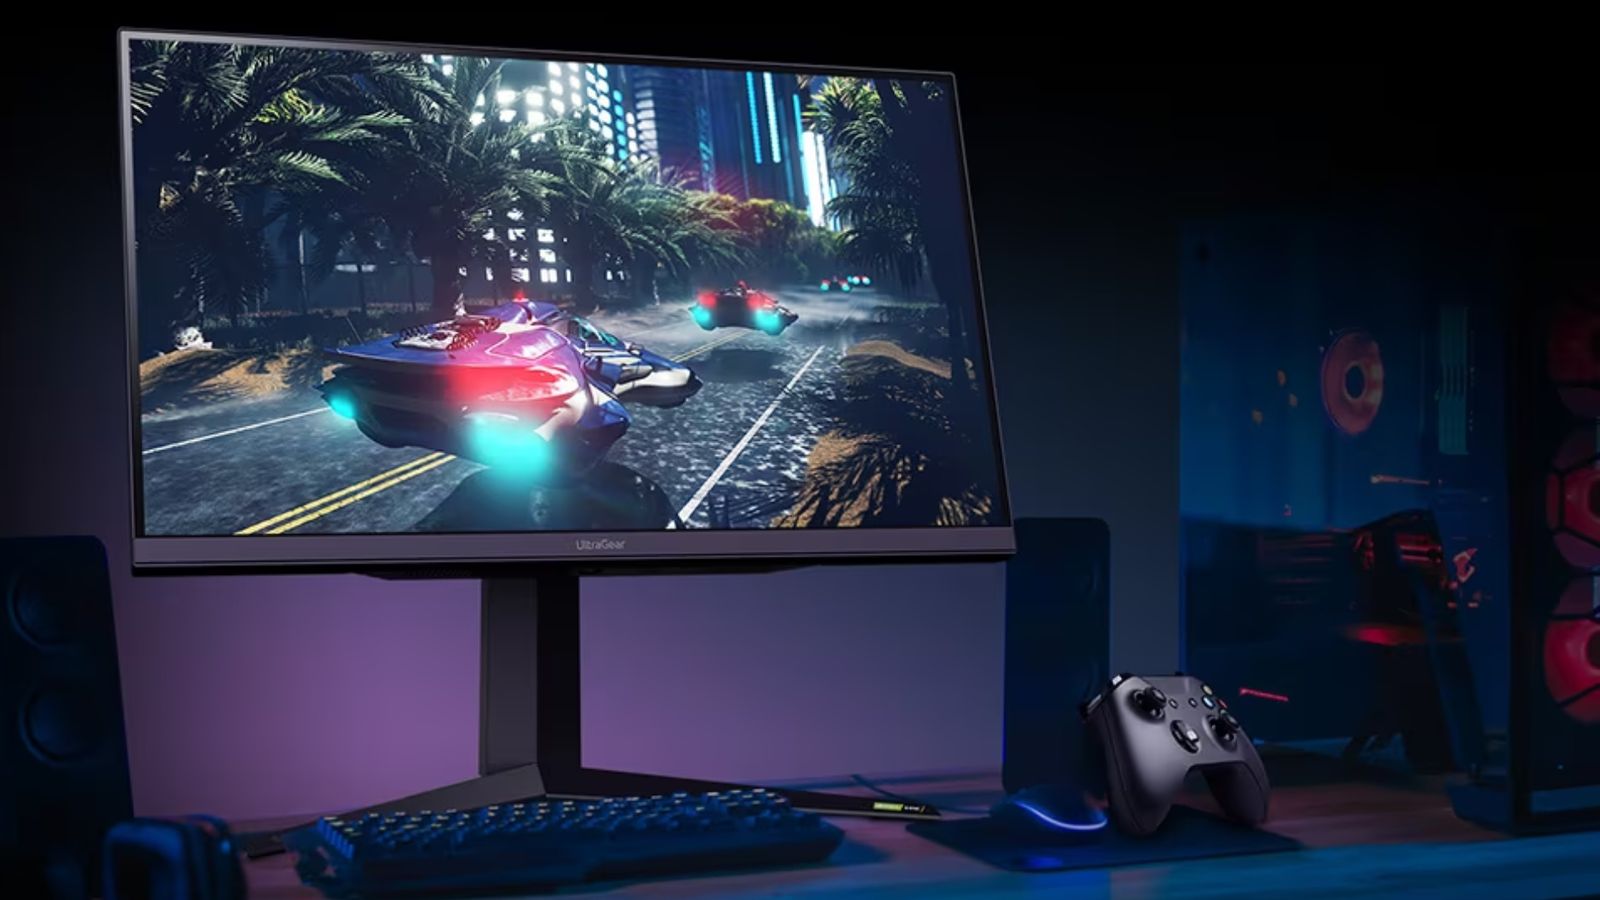 Image of a black LG monitor with hover cars on the display sat on a desk with a black keyboard and controller.